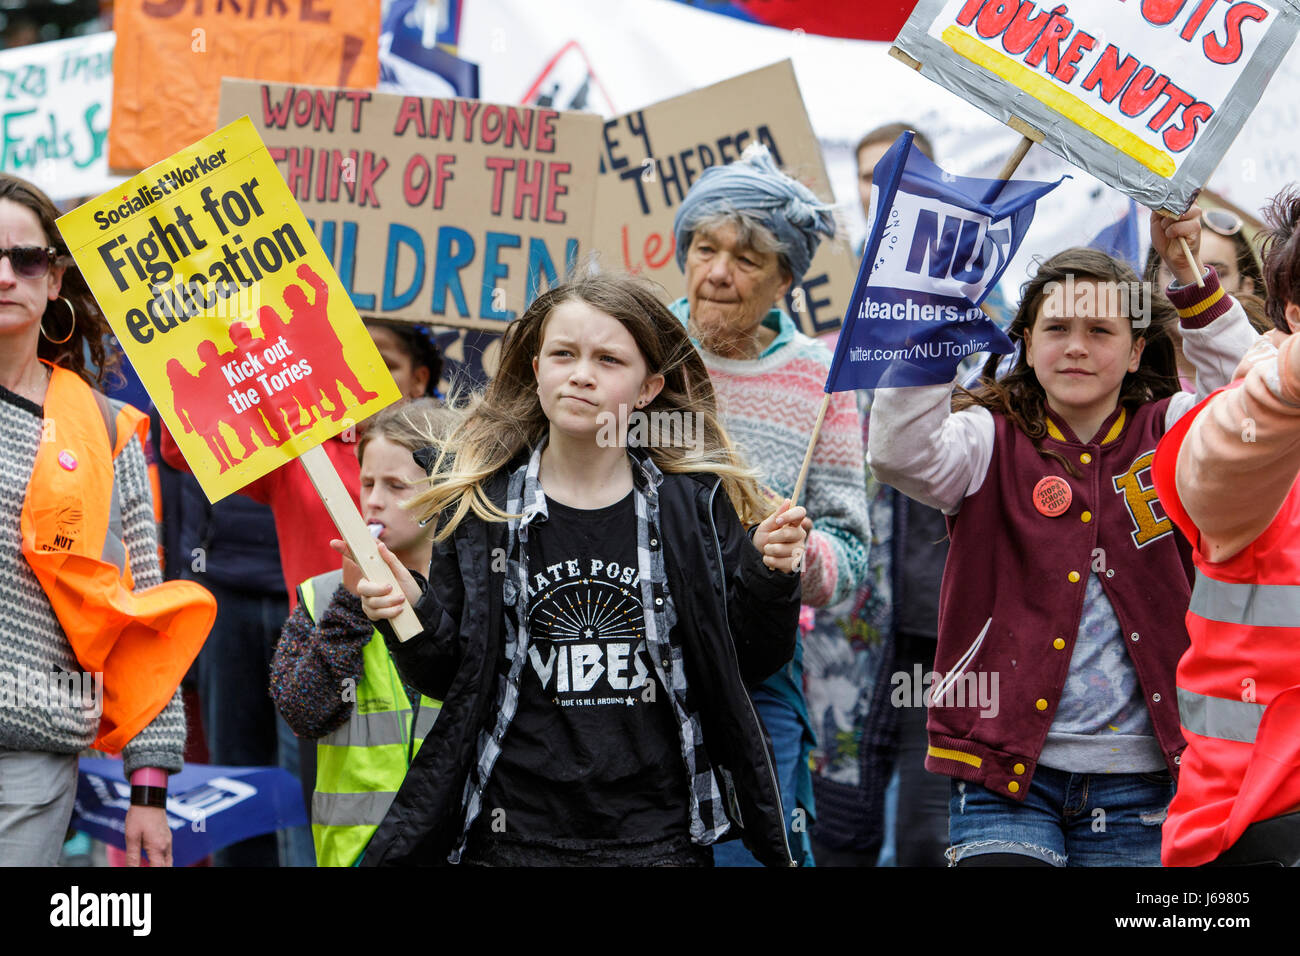 Bristol,UK. 20th May, 2017. Protesters carrying signs and placards are pictured as they march through the streets of Bristol to protest about education cuts,the march was organised by the South West Region of the NUT in response to the huge assault on school funding. Credit: lynchpics/Alamy Live News Stock Photo